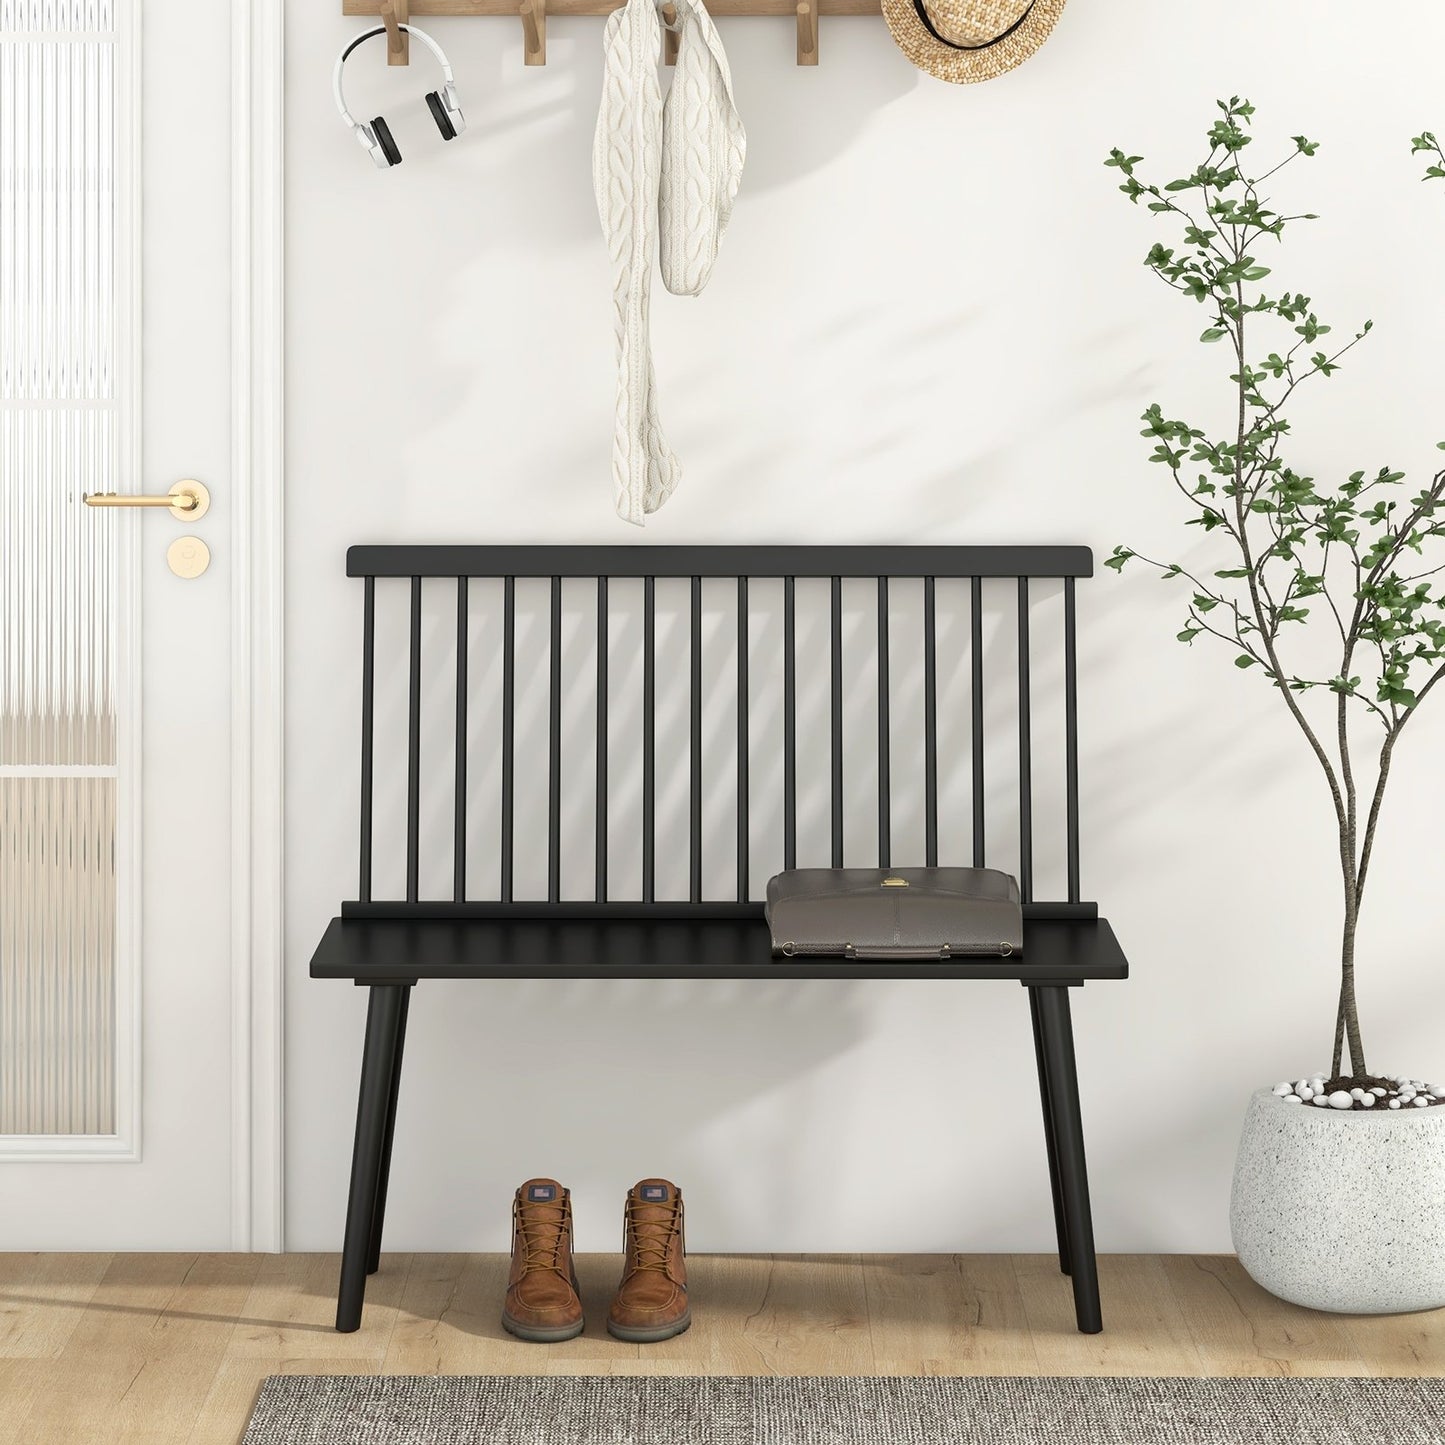 Entryway Bench for 2 with Spindle Back for Kitchen Dining Room Hallway, Black